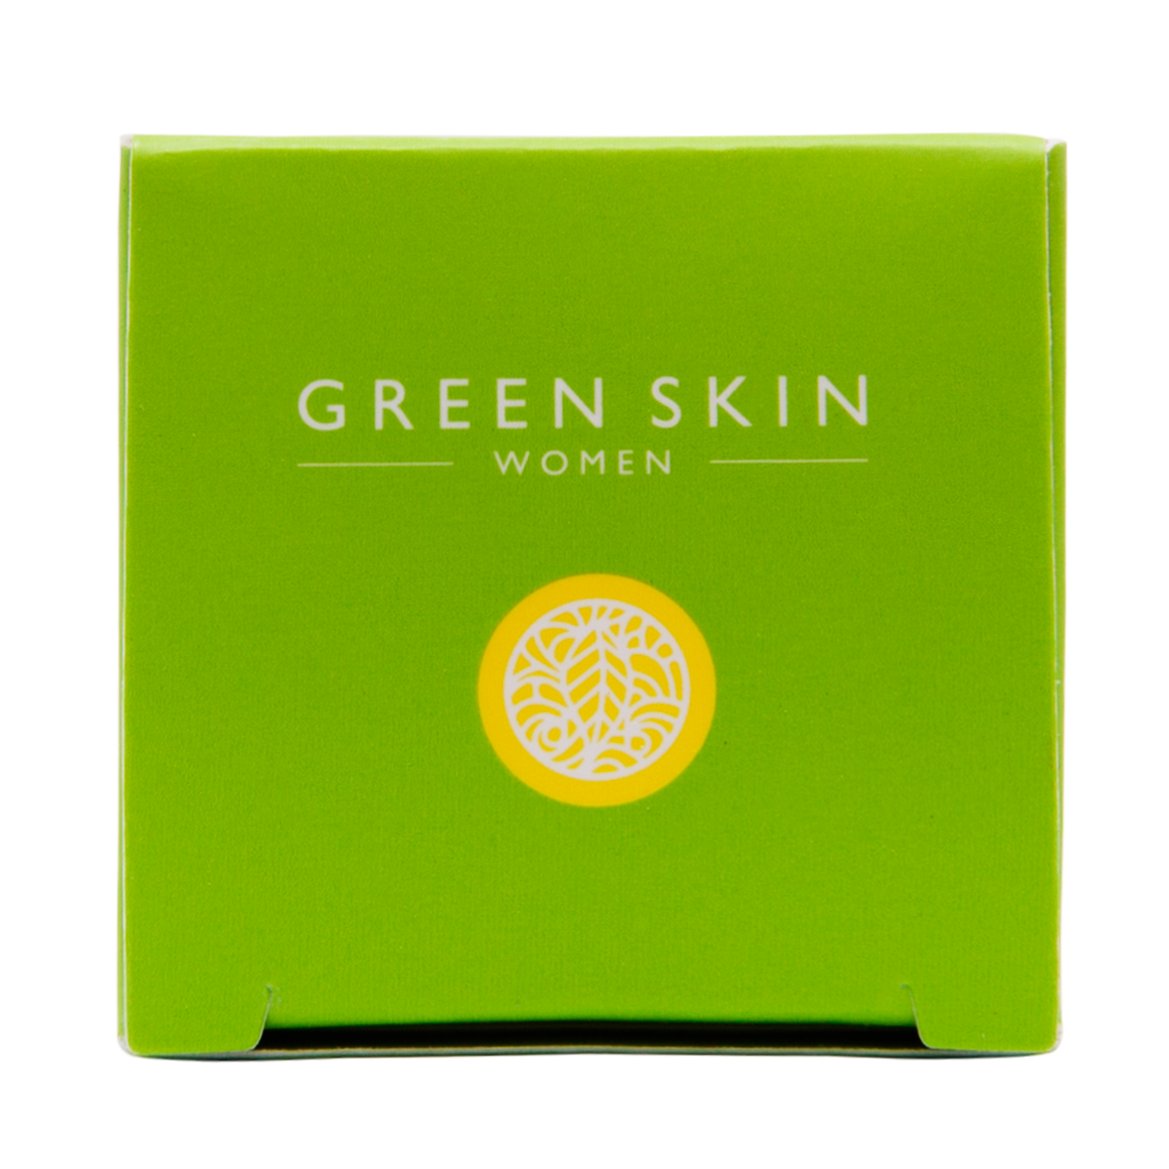 Greenskin360 is the newest line of product based on 100% all natural ingredients based on beauty secrets passed down through generations.